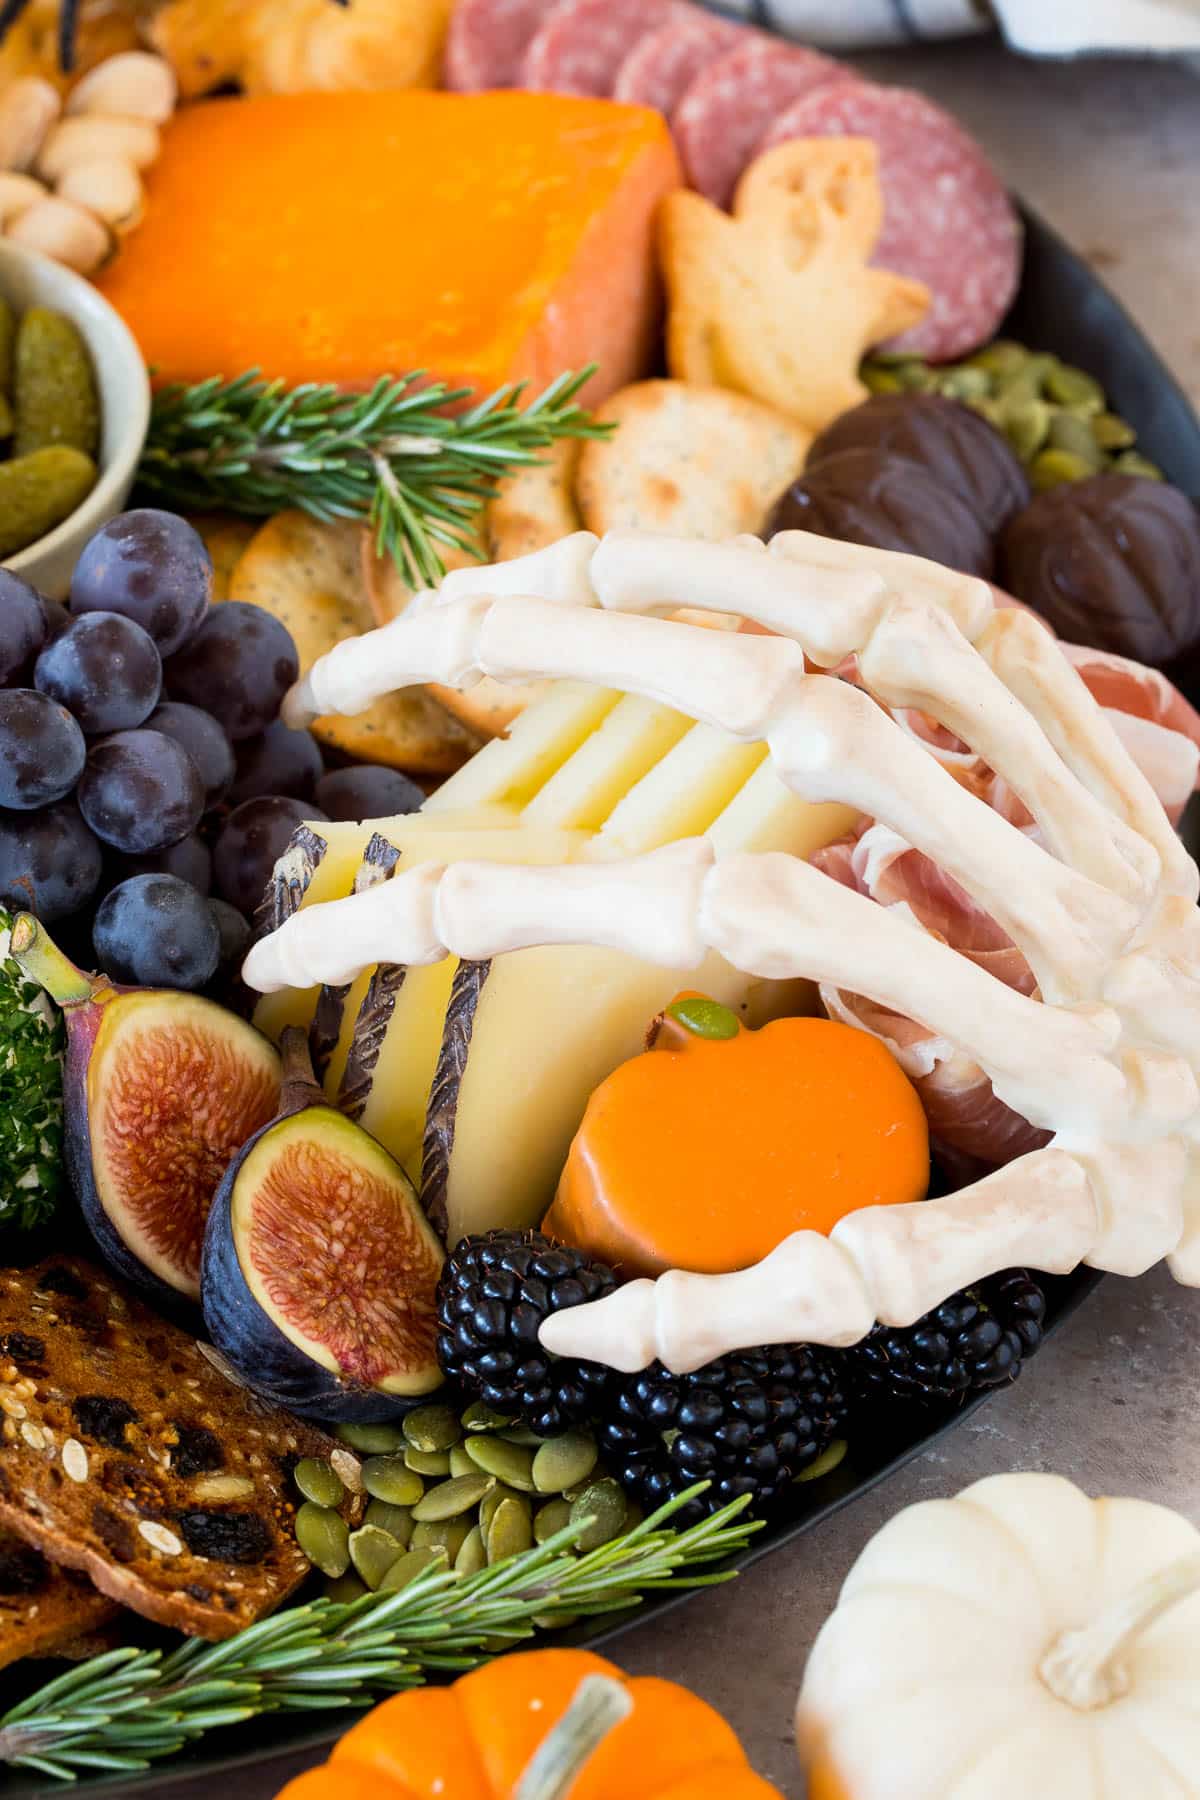 Fruits and cheeses on a party platter.